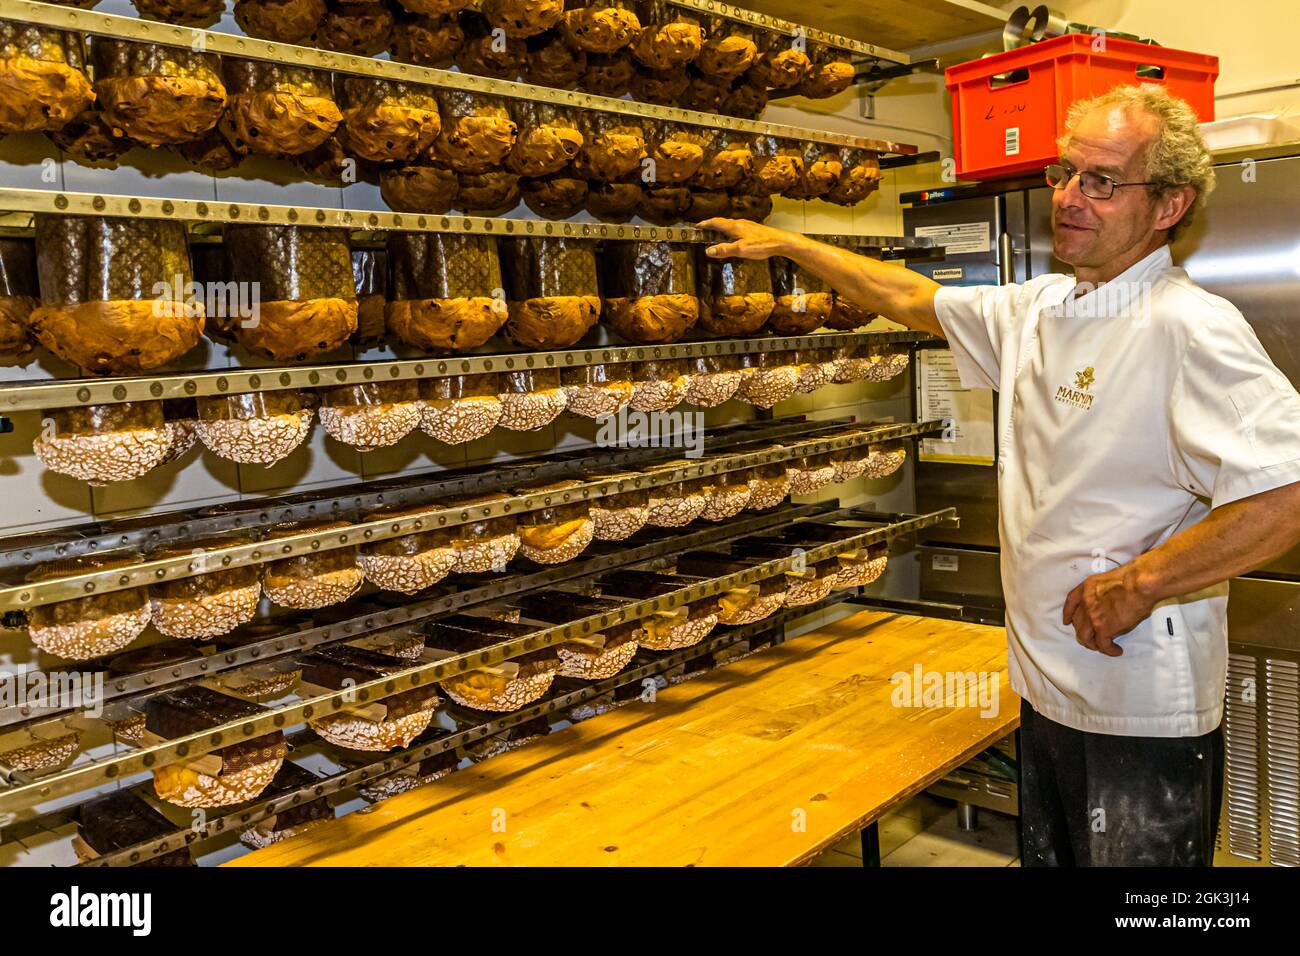 To prevent the magnificent dome from collapsing, panettone are hung upside down to cool immediately after baking. Panettone Prduction in the Pasticceria Marnin in Locarno, Switzerland. Circolo di Locarno, Switzerland Stock Photo